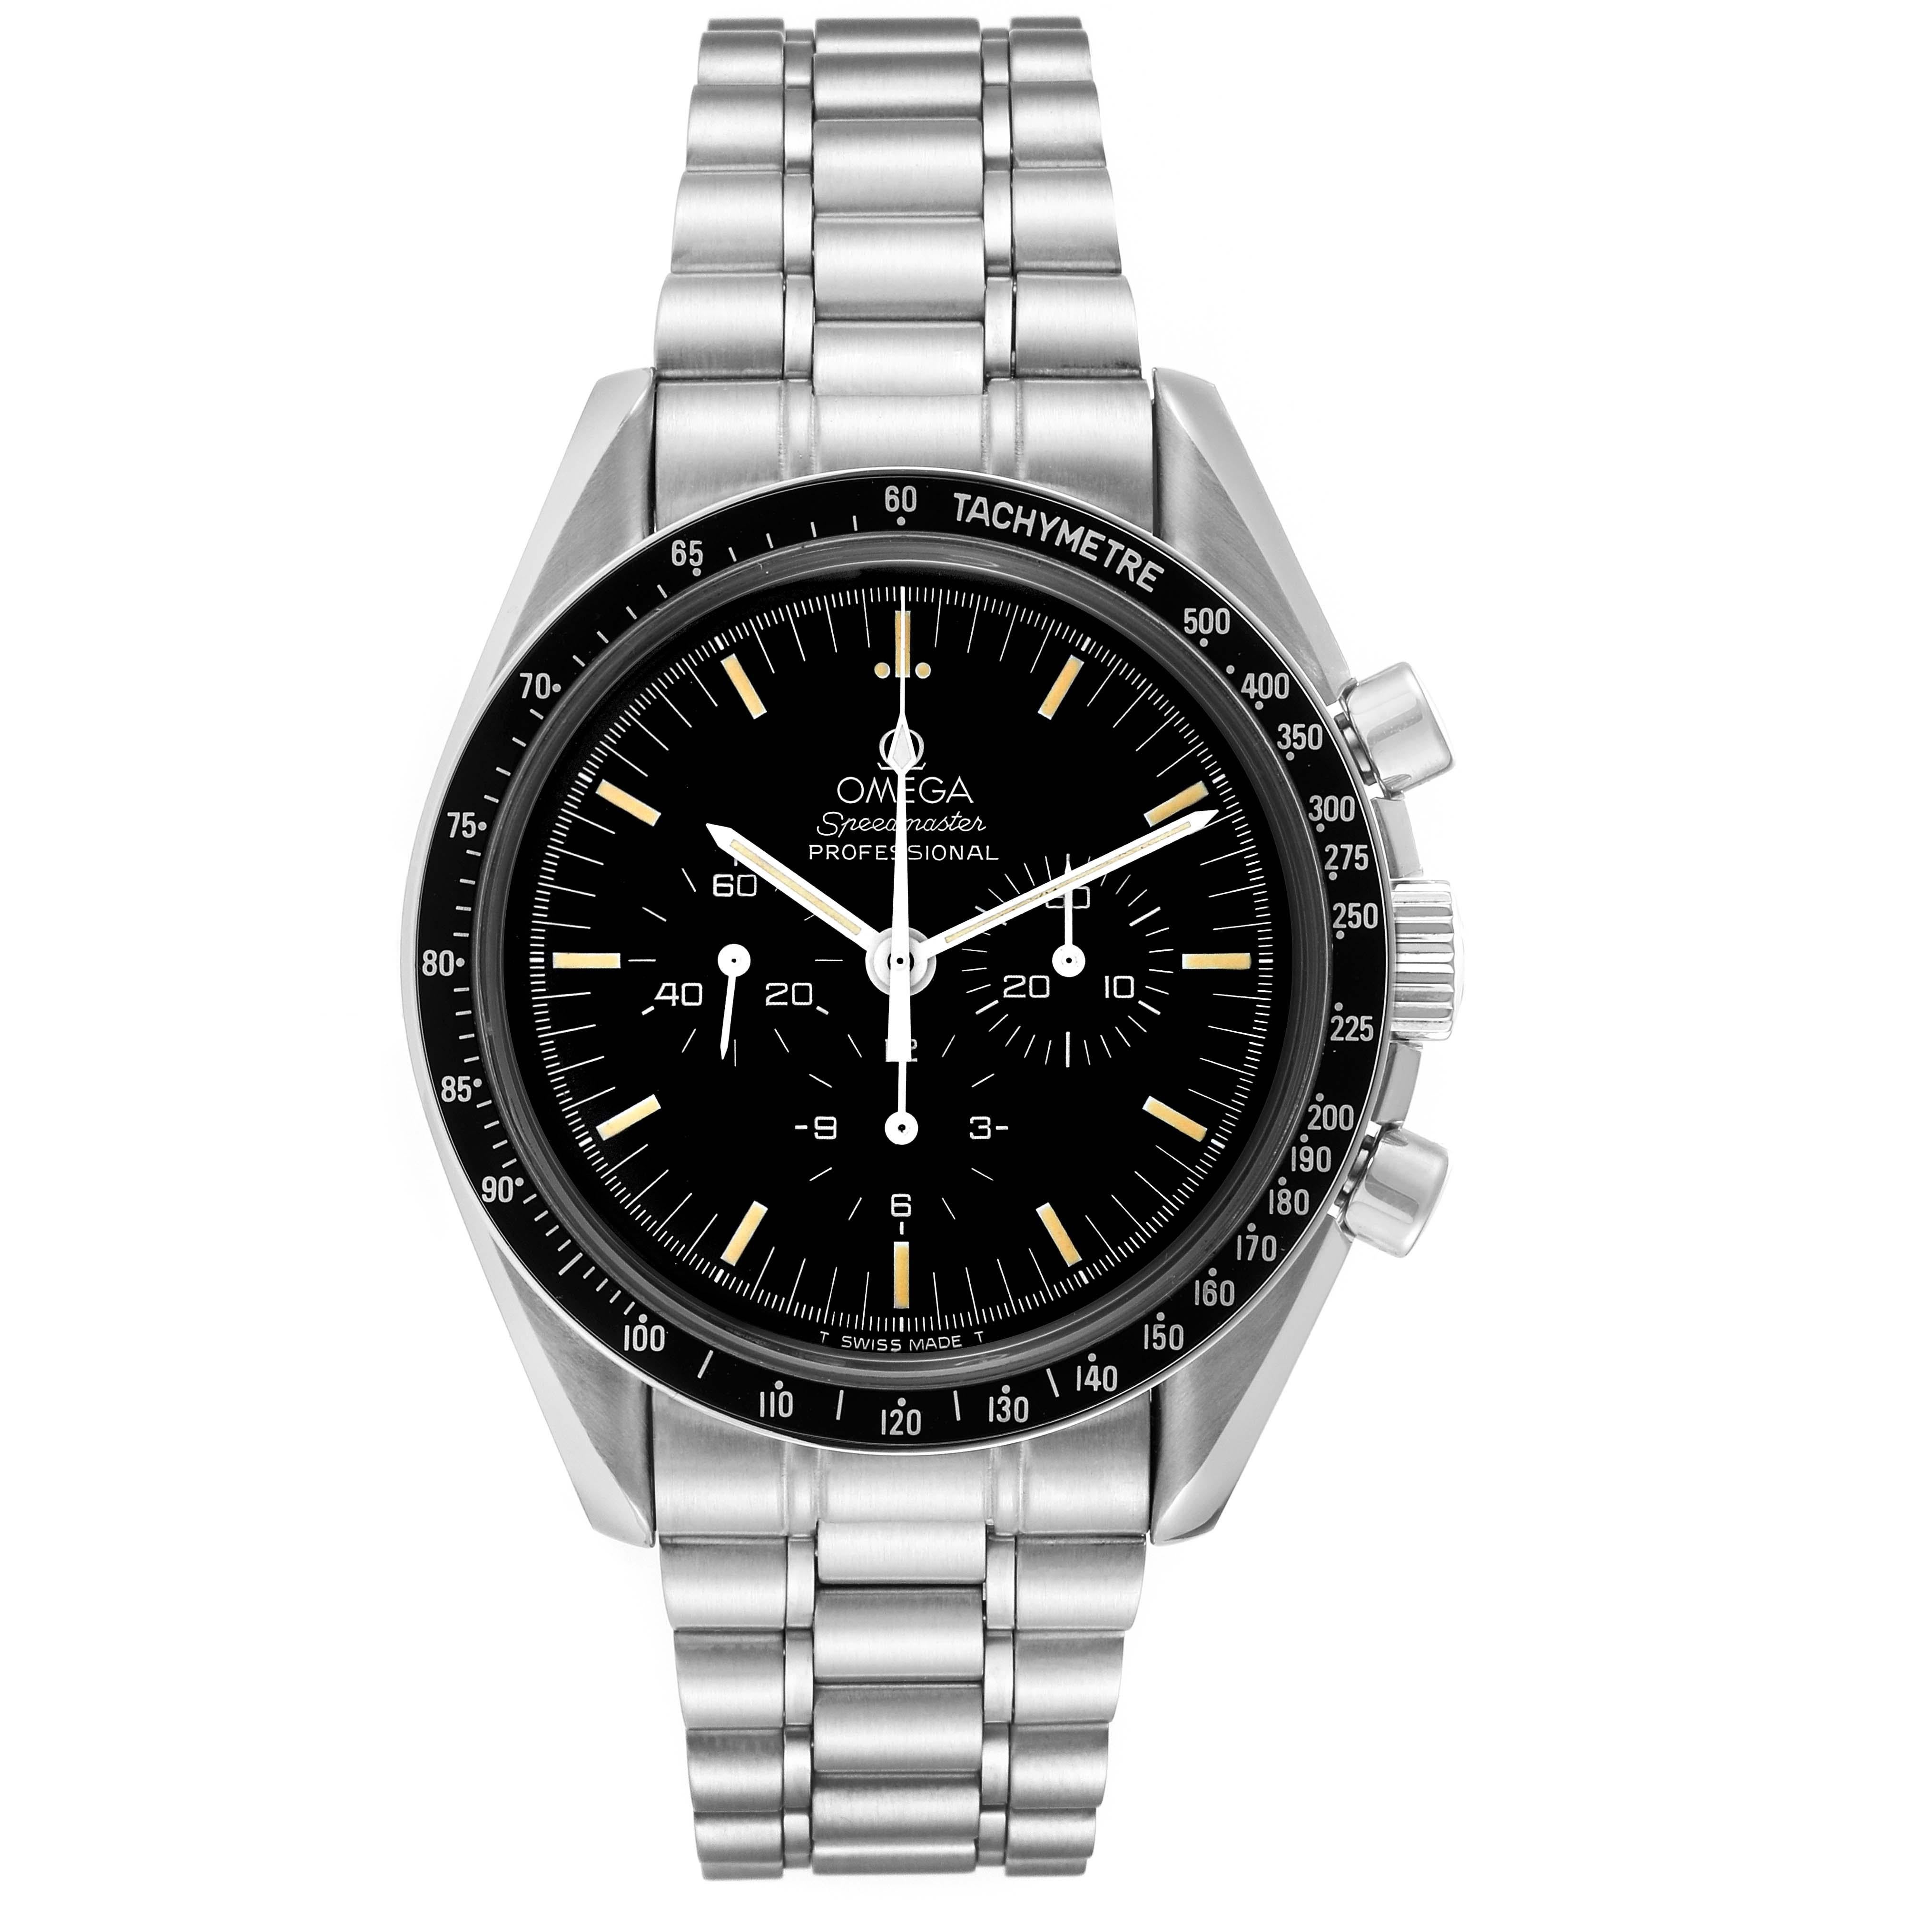 Omega Speedmaster Professional Moonwatch Steel Mens Watch 3592.50.00 Card. Manual winding chronograph movement. Stainless steel round case 42.0 mm in diameter. Exhibition transparent sapphire crystal caseback. Black bezel with tachymeter function.